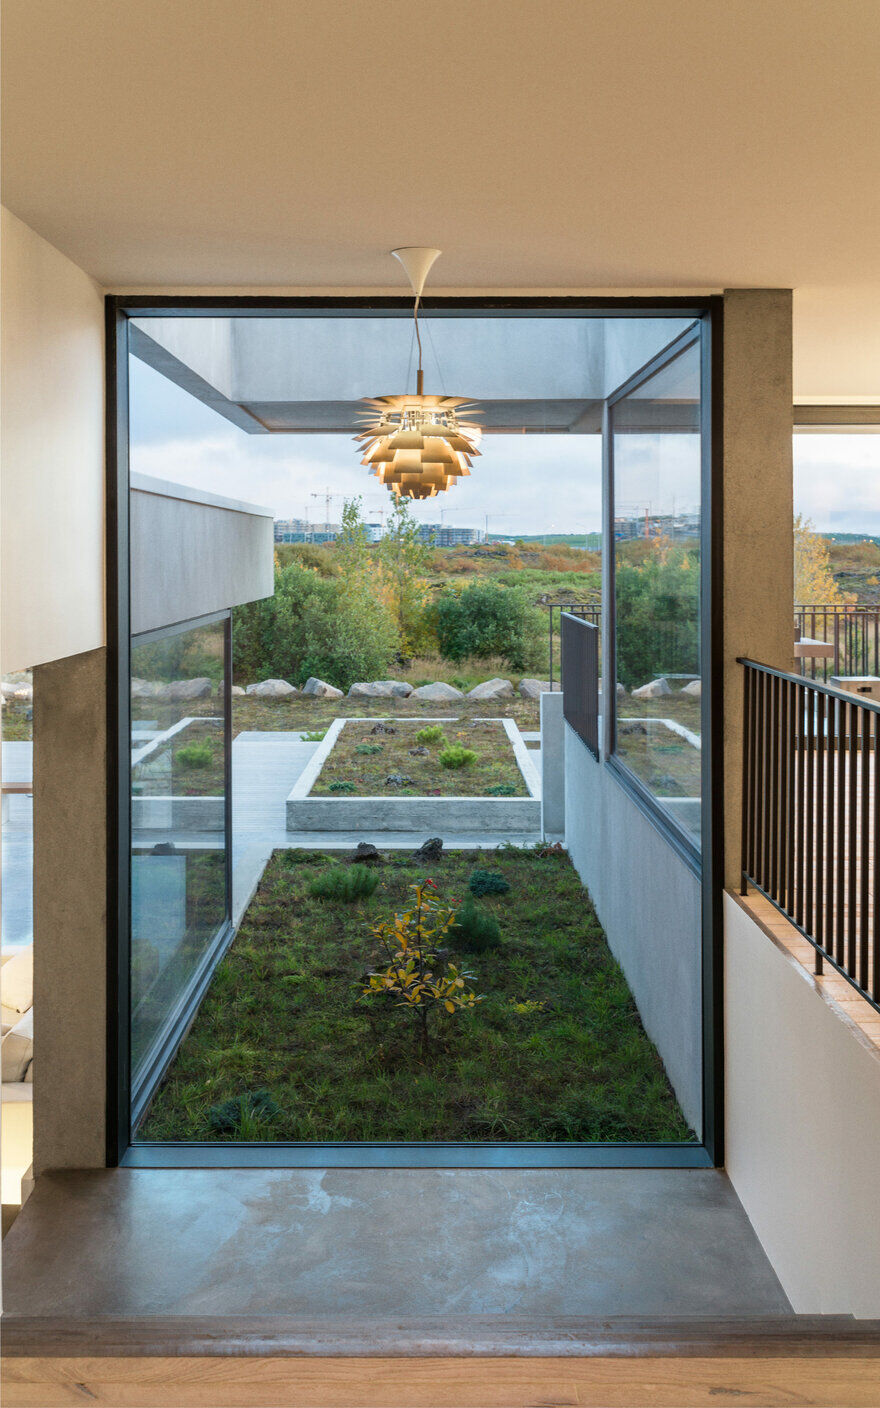 Sunnuflot House - Renovation and Expansion of a Family Home in Reykjavík